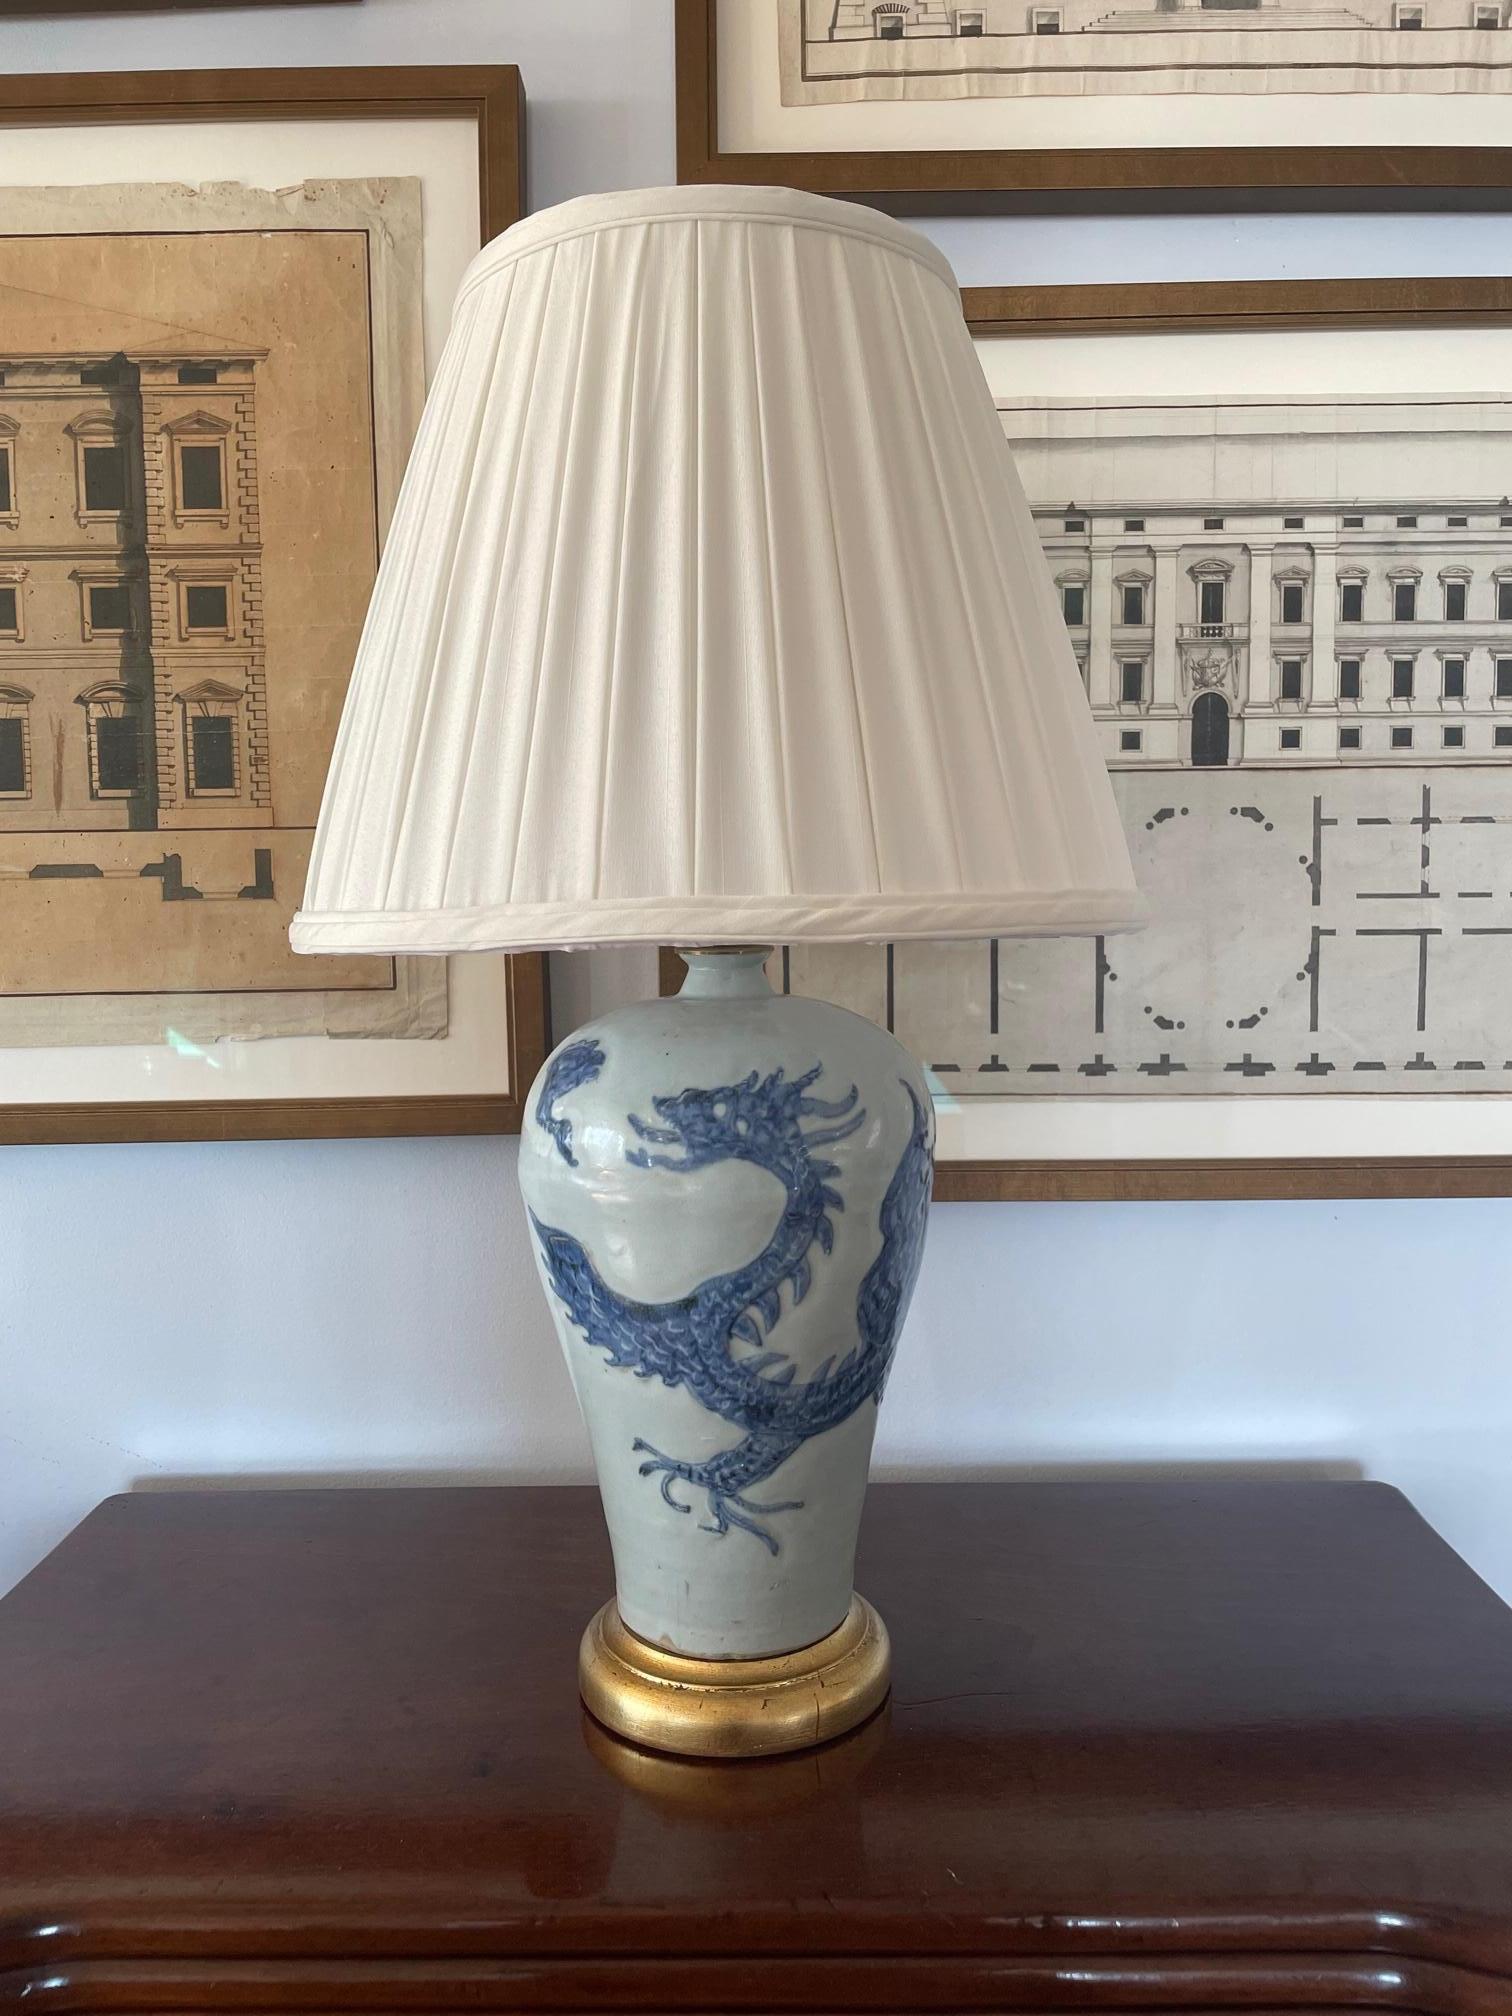 Pair of Blue and White Chinese porcelain lamps with Dragon Motif on gilded bases. 20th Century.